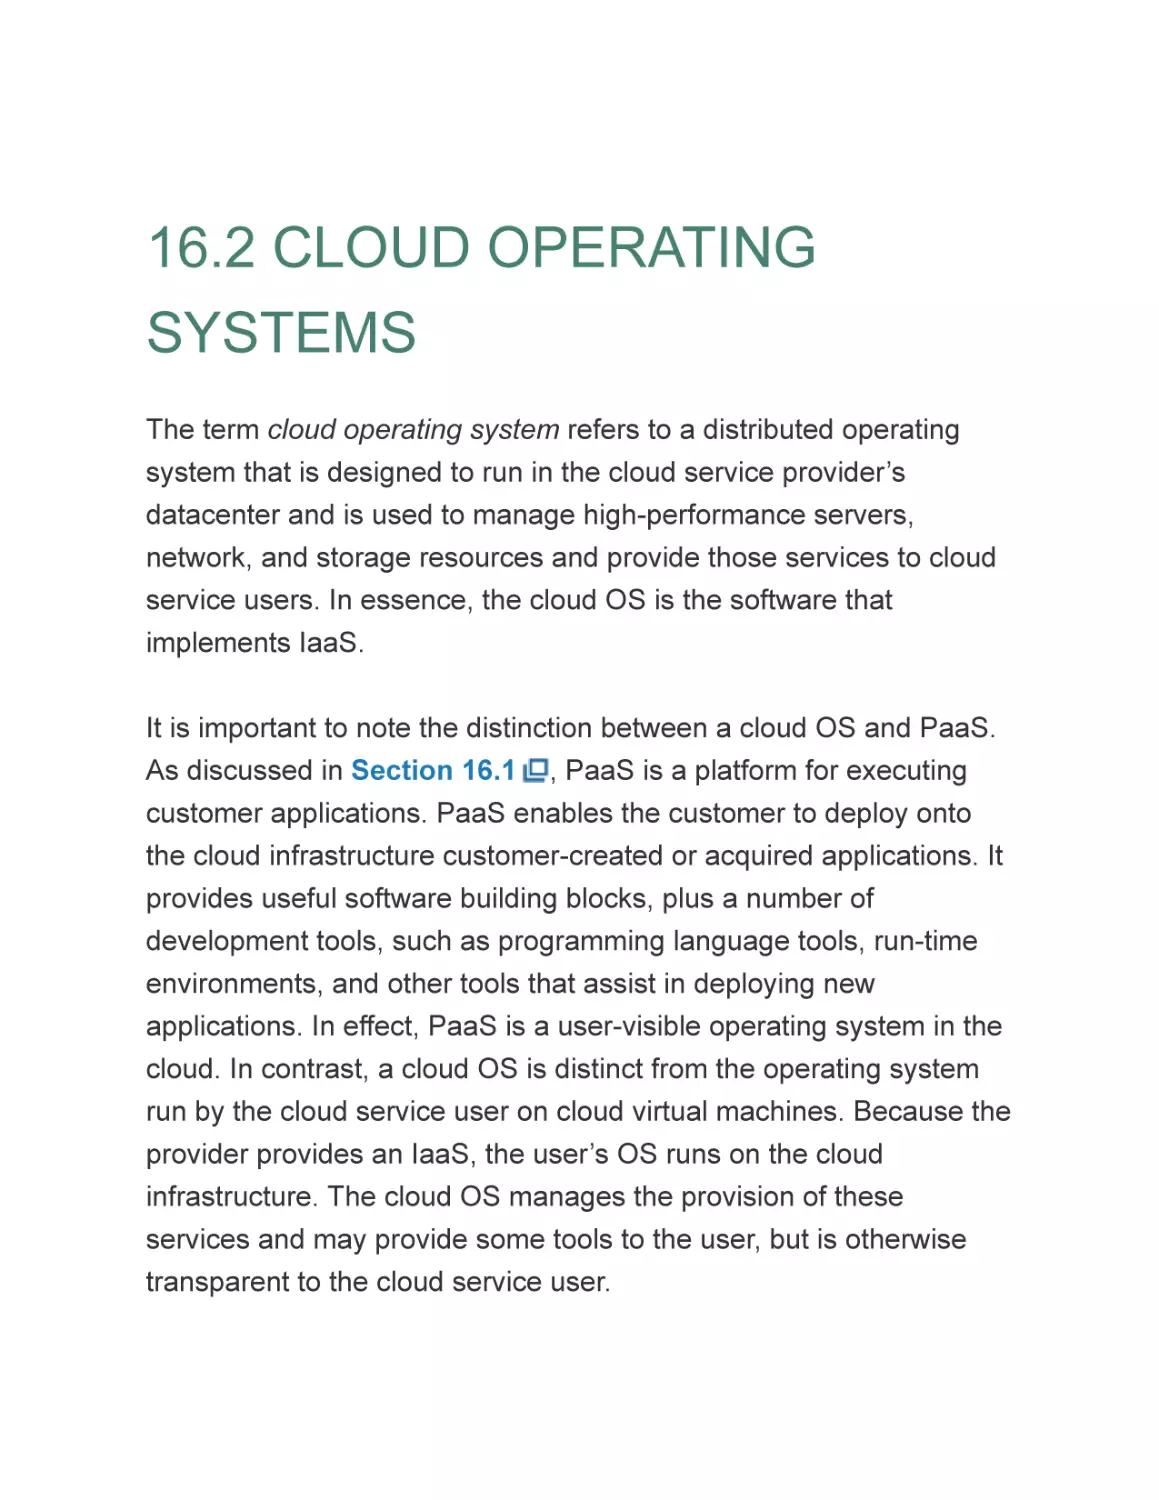 16.2 CLOUD OPERATING SYSTEMS